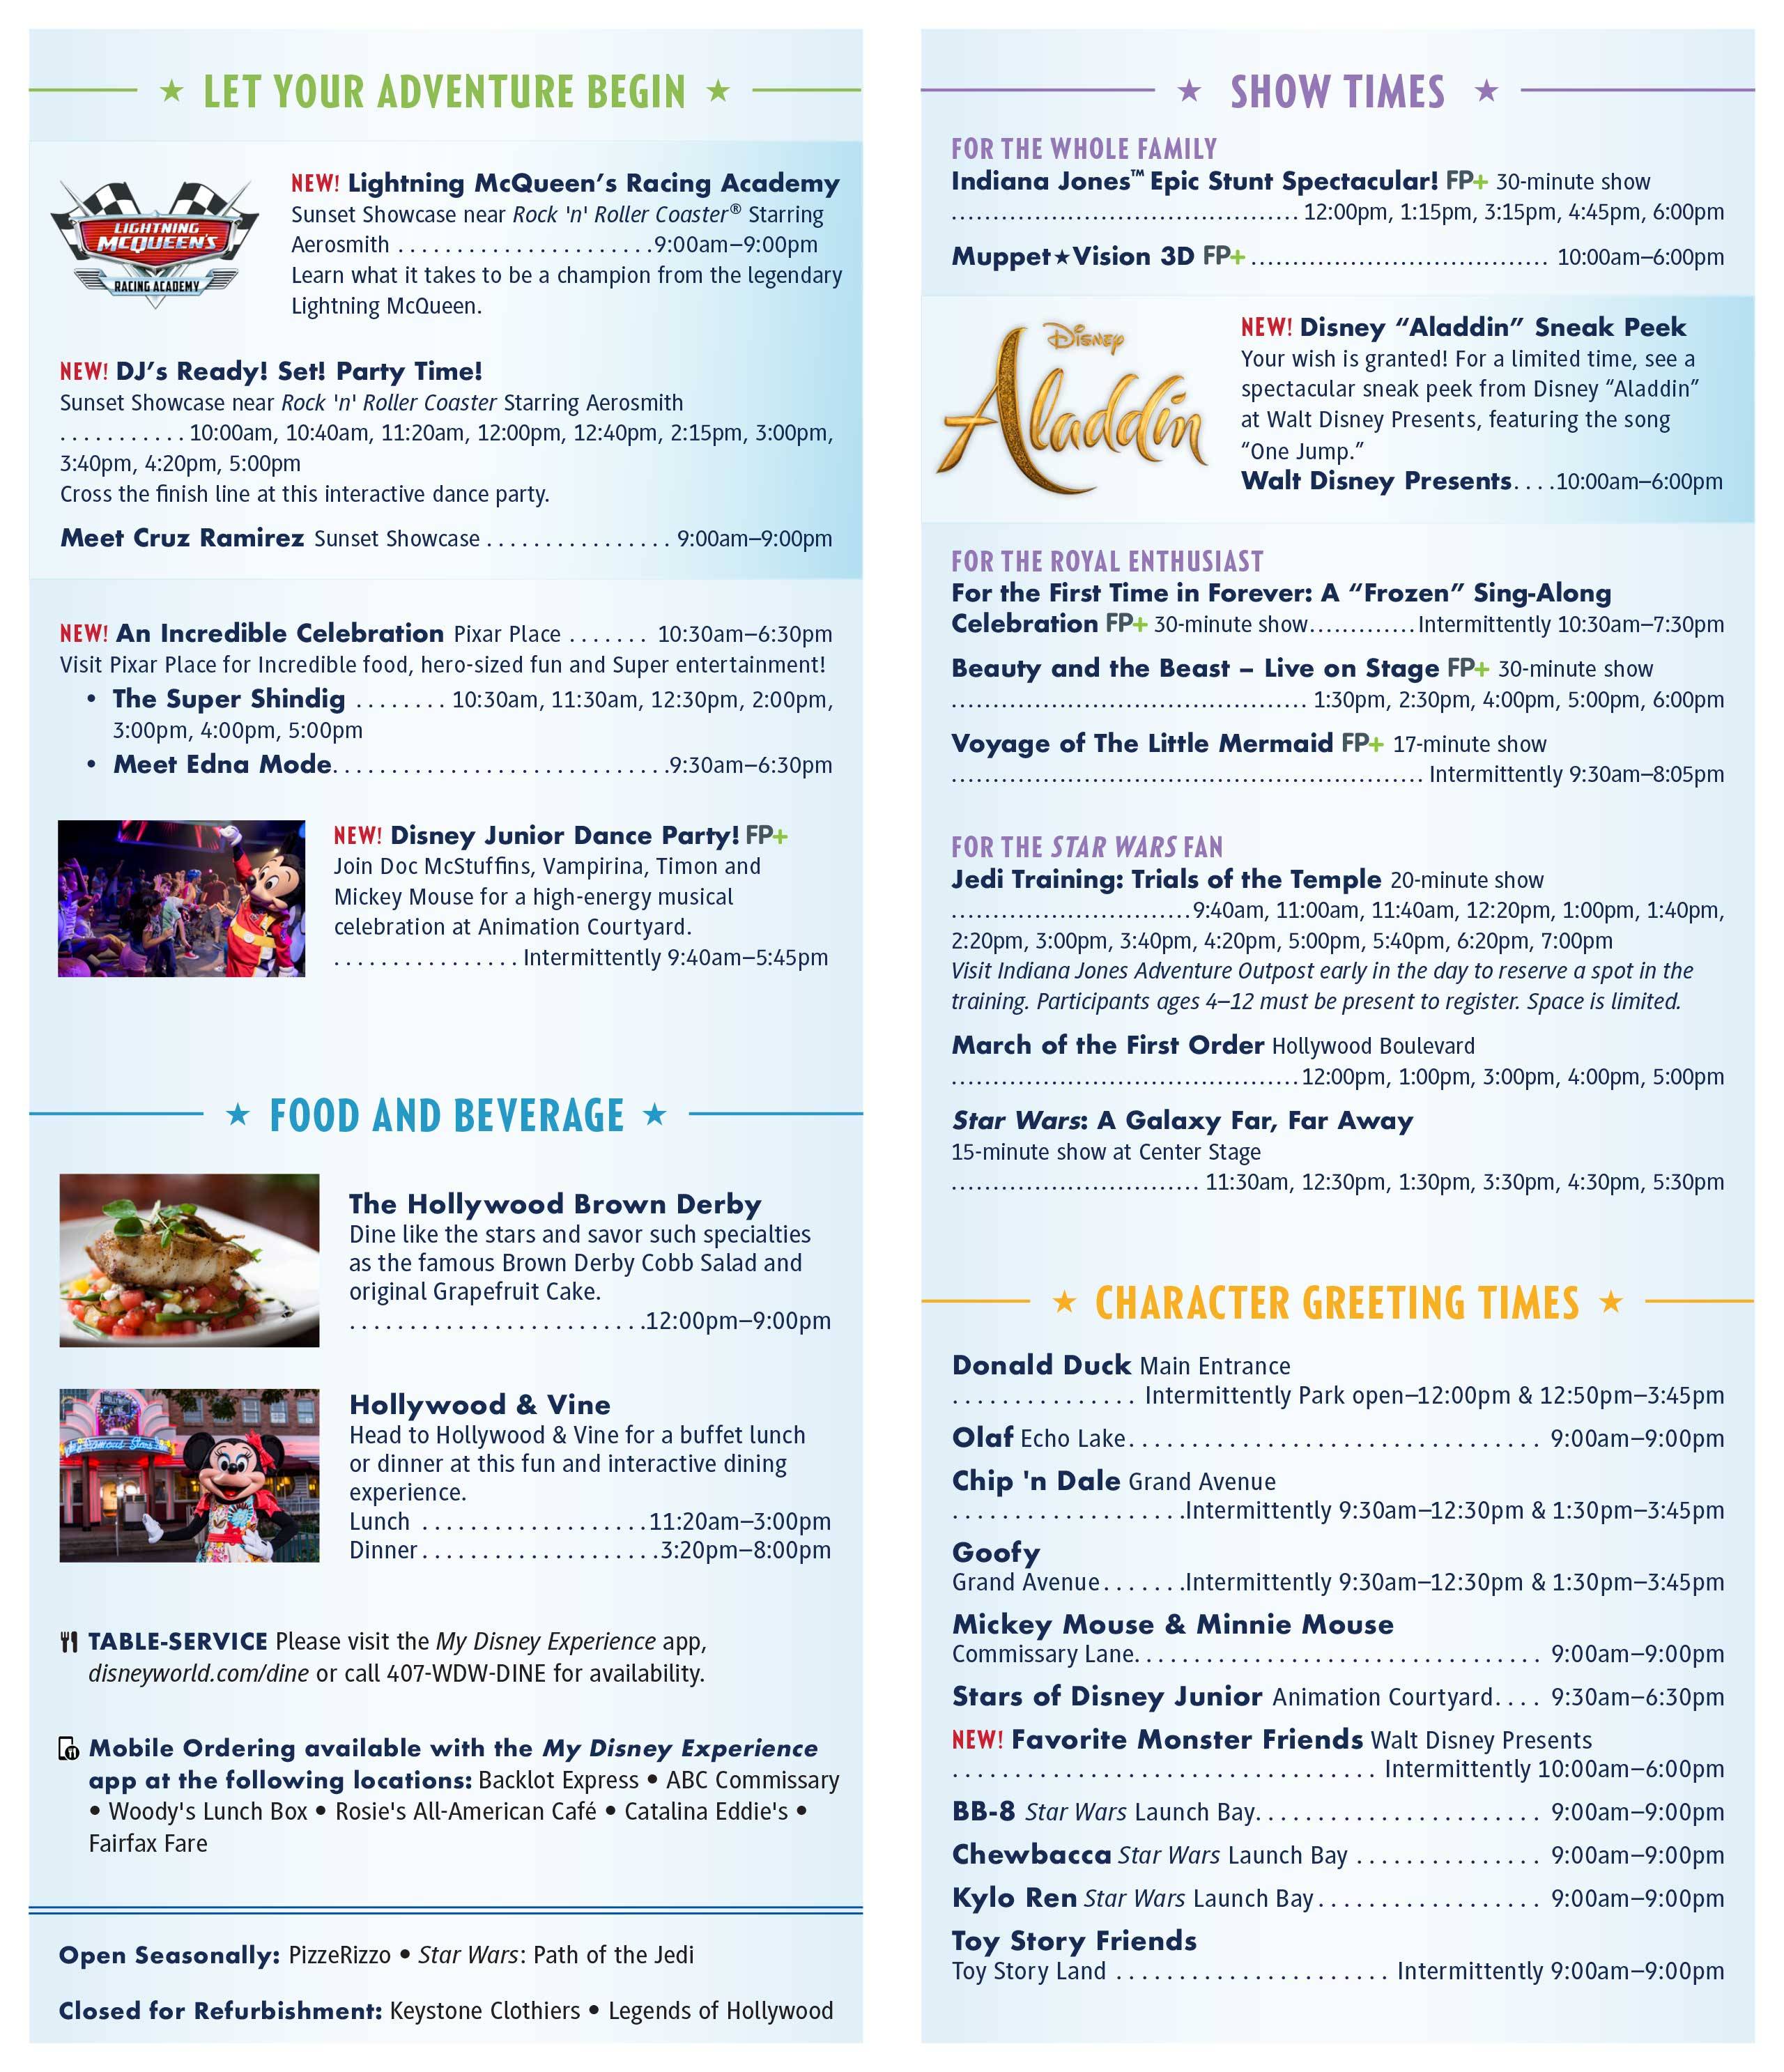 Disney's Hollywood Studios 30th Anniversary times guide